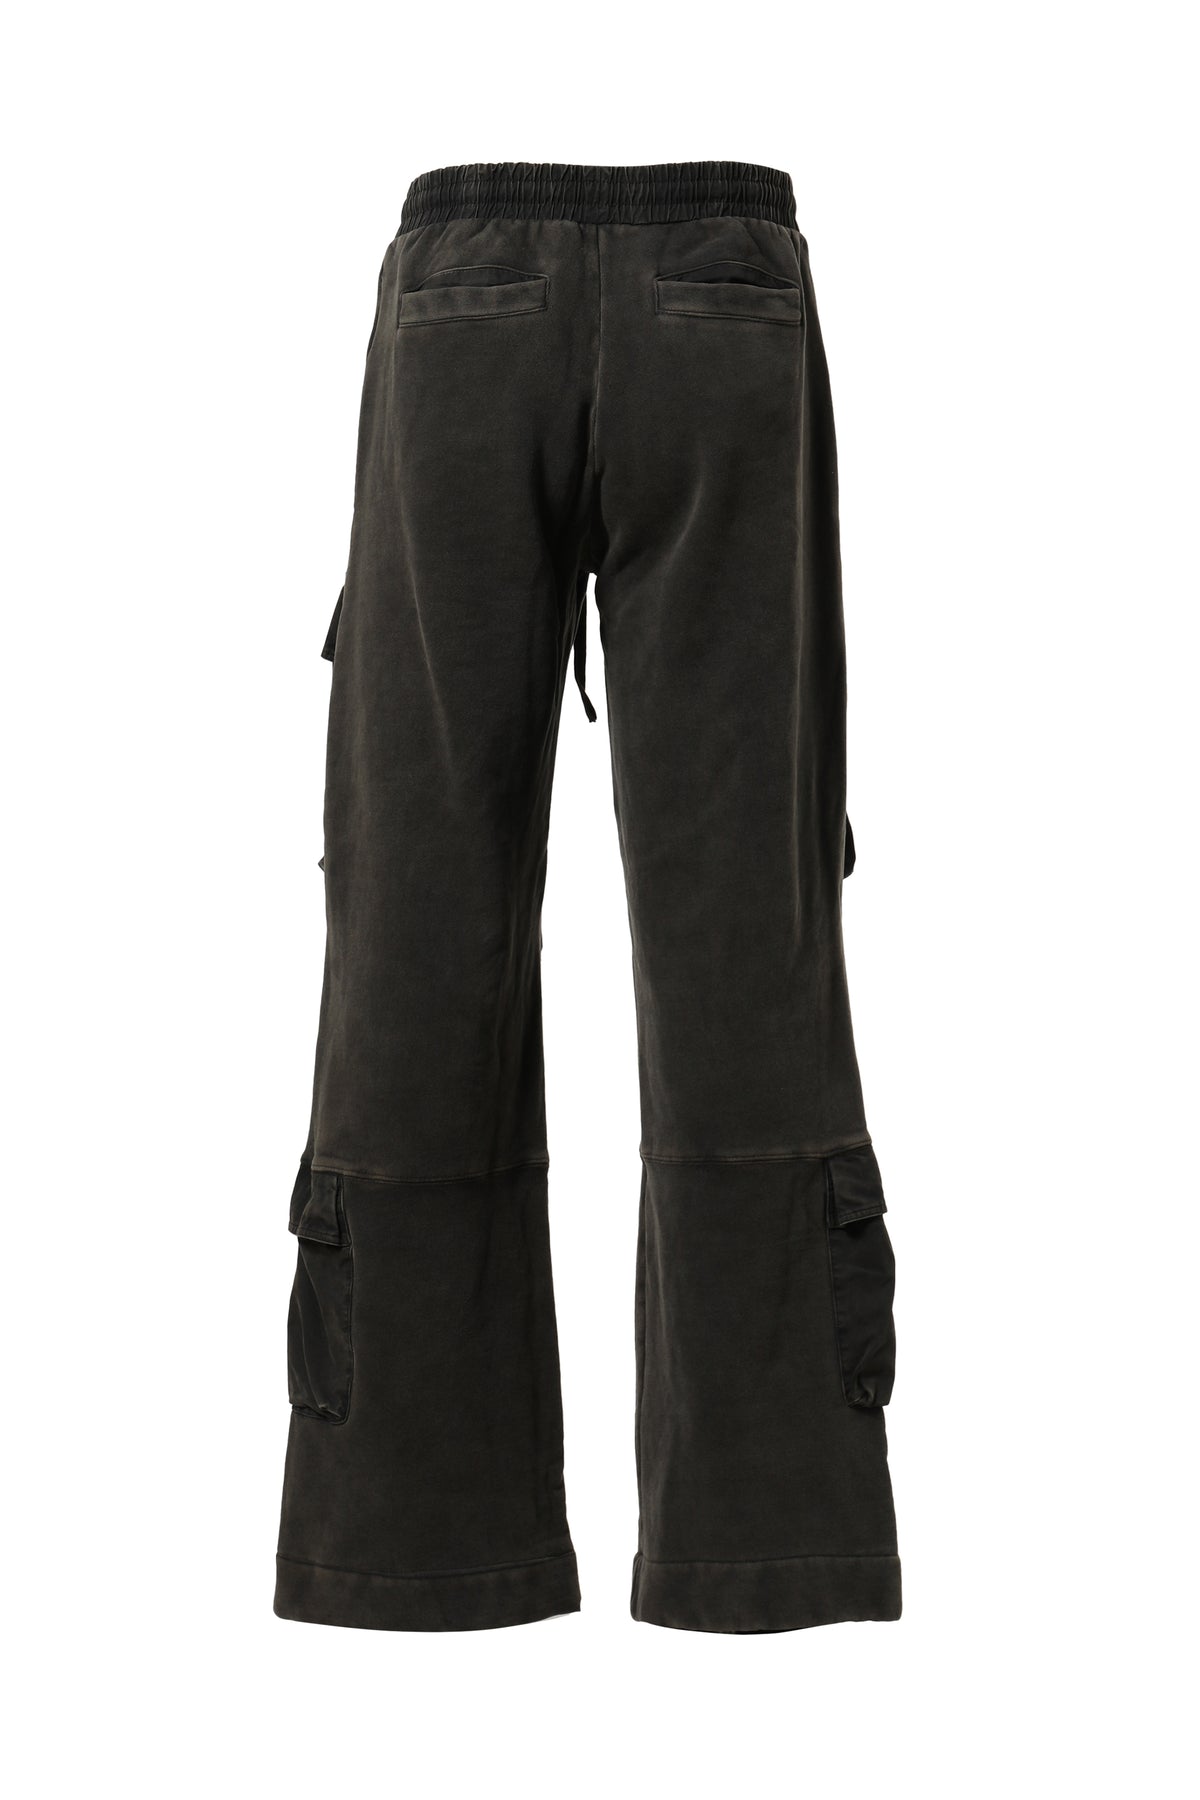 entire studios UTILITY SWEATS / WASHED BLK